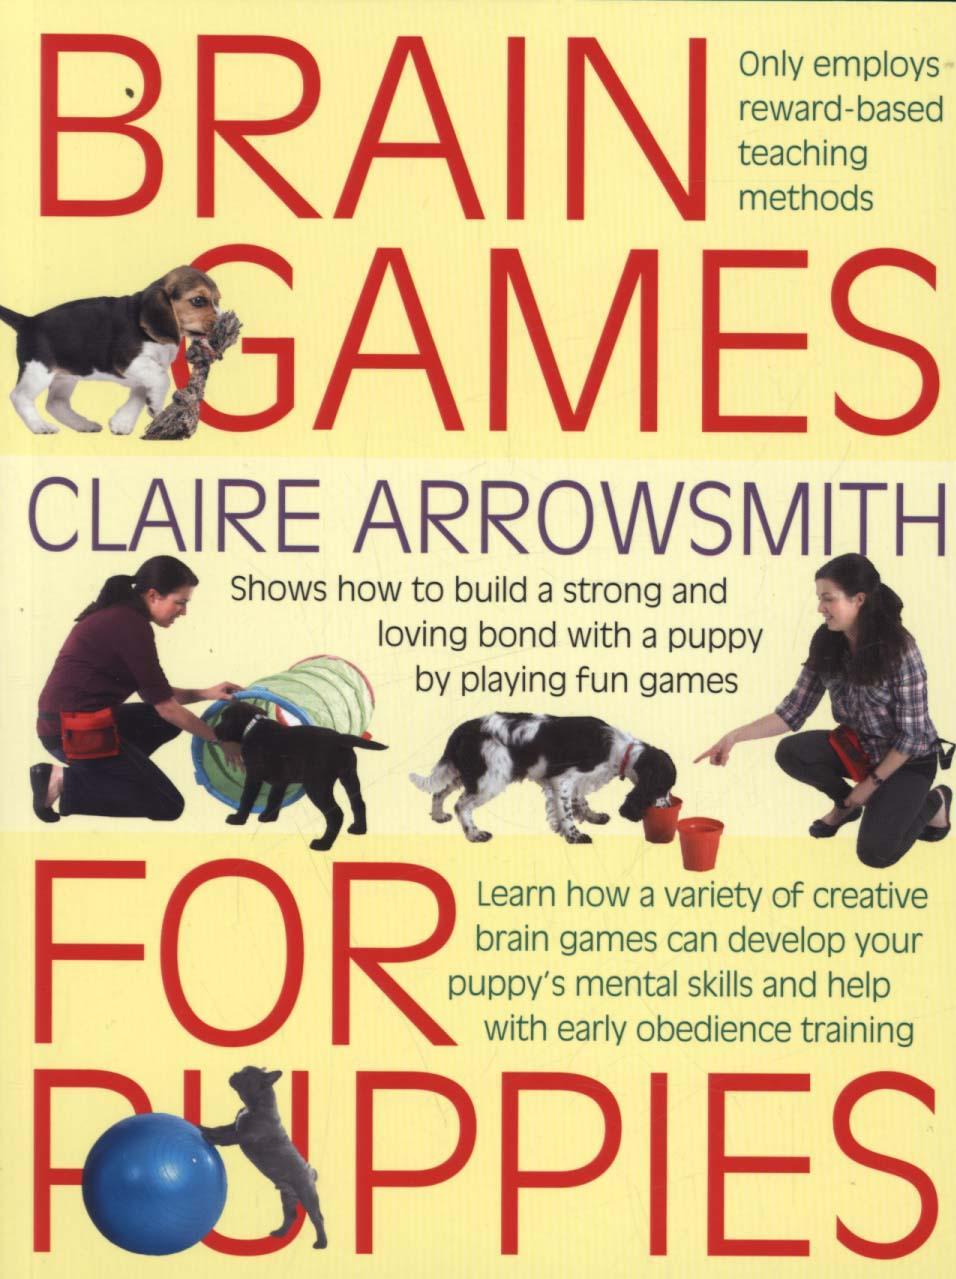 Brain Games for Puppies